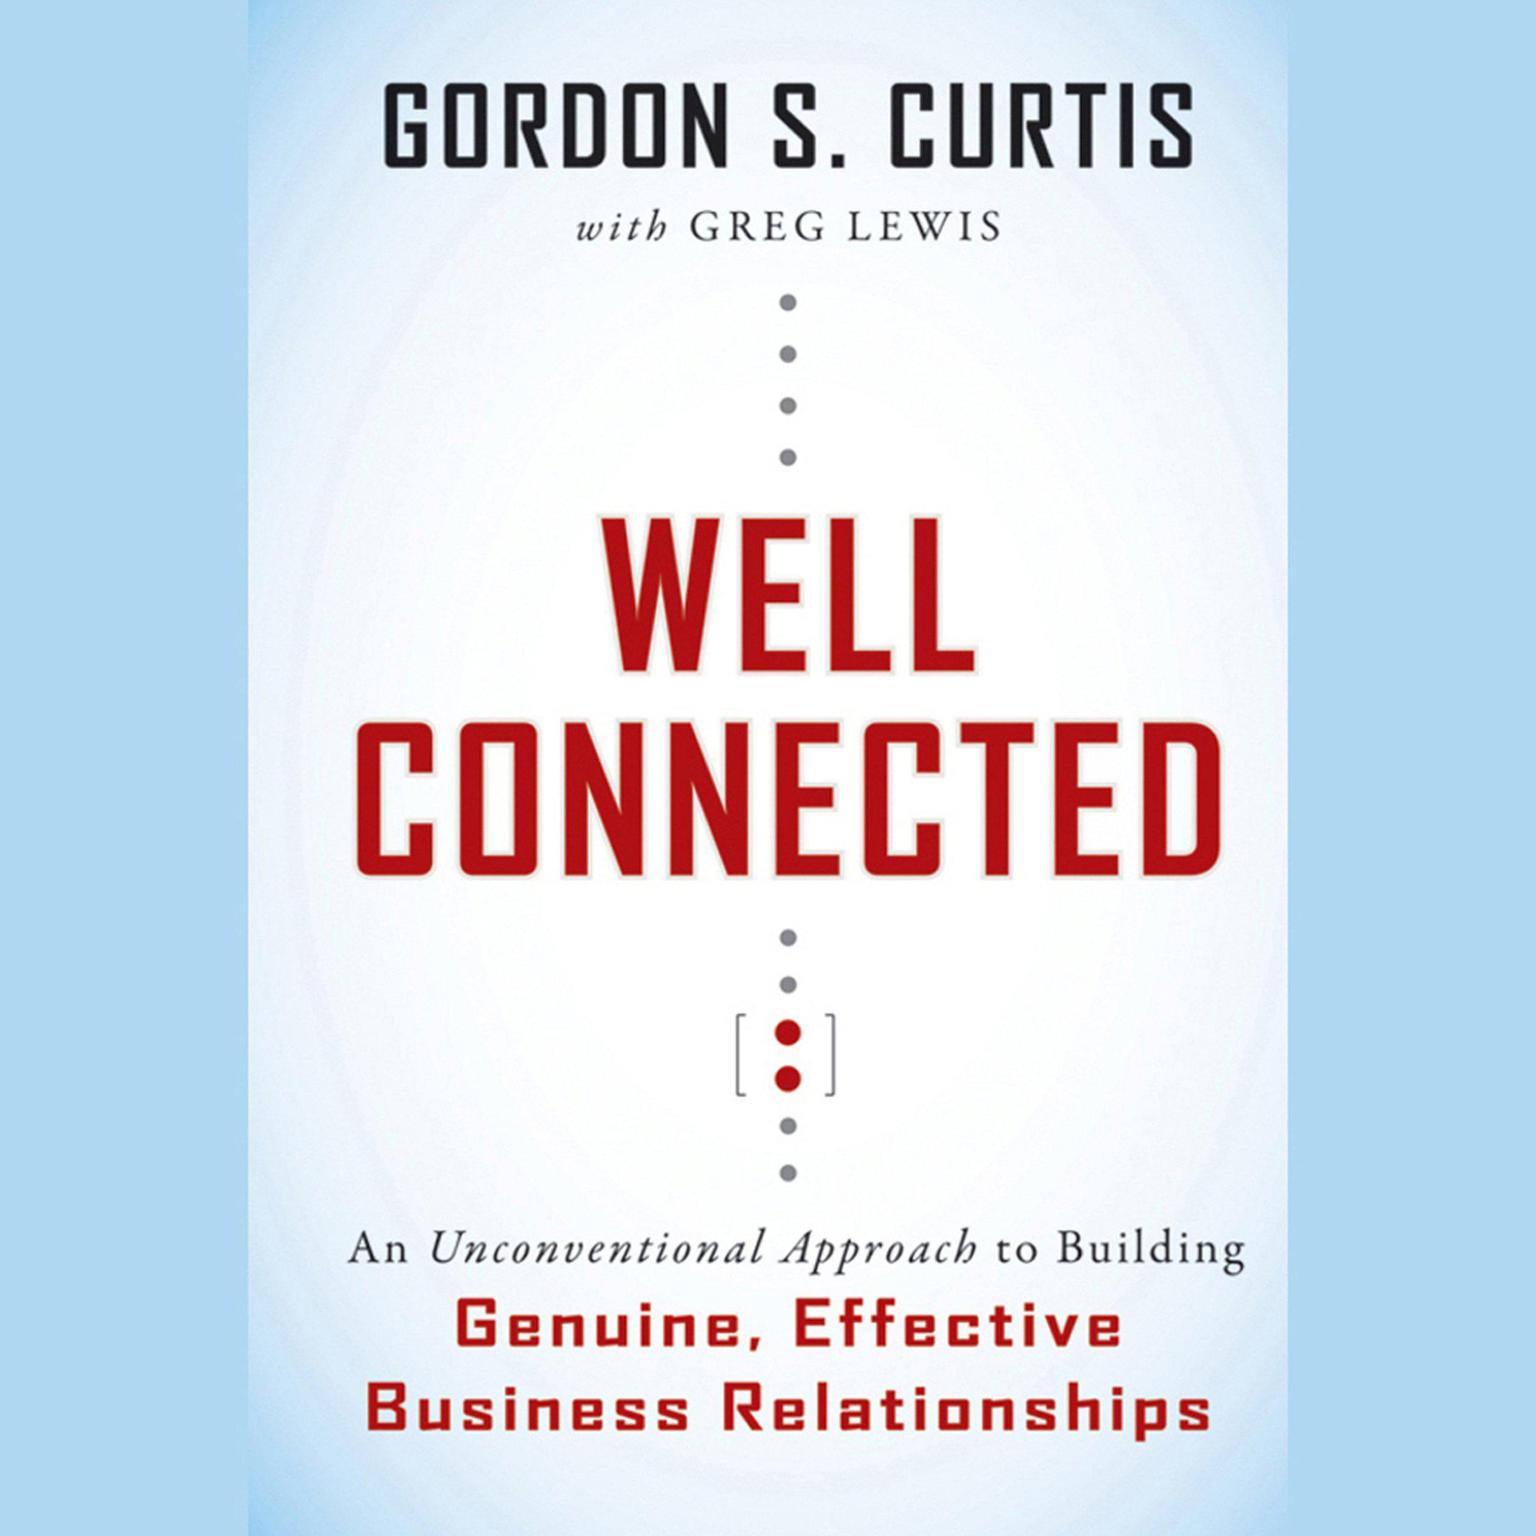 Well Connected: An Unconventional Approach to Building Genuine, Effective Business Relationships Audiobook, by Gordon S. Curtis